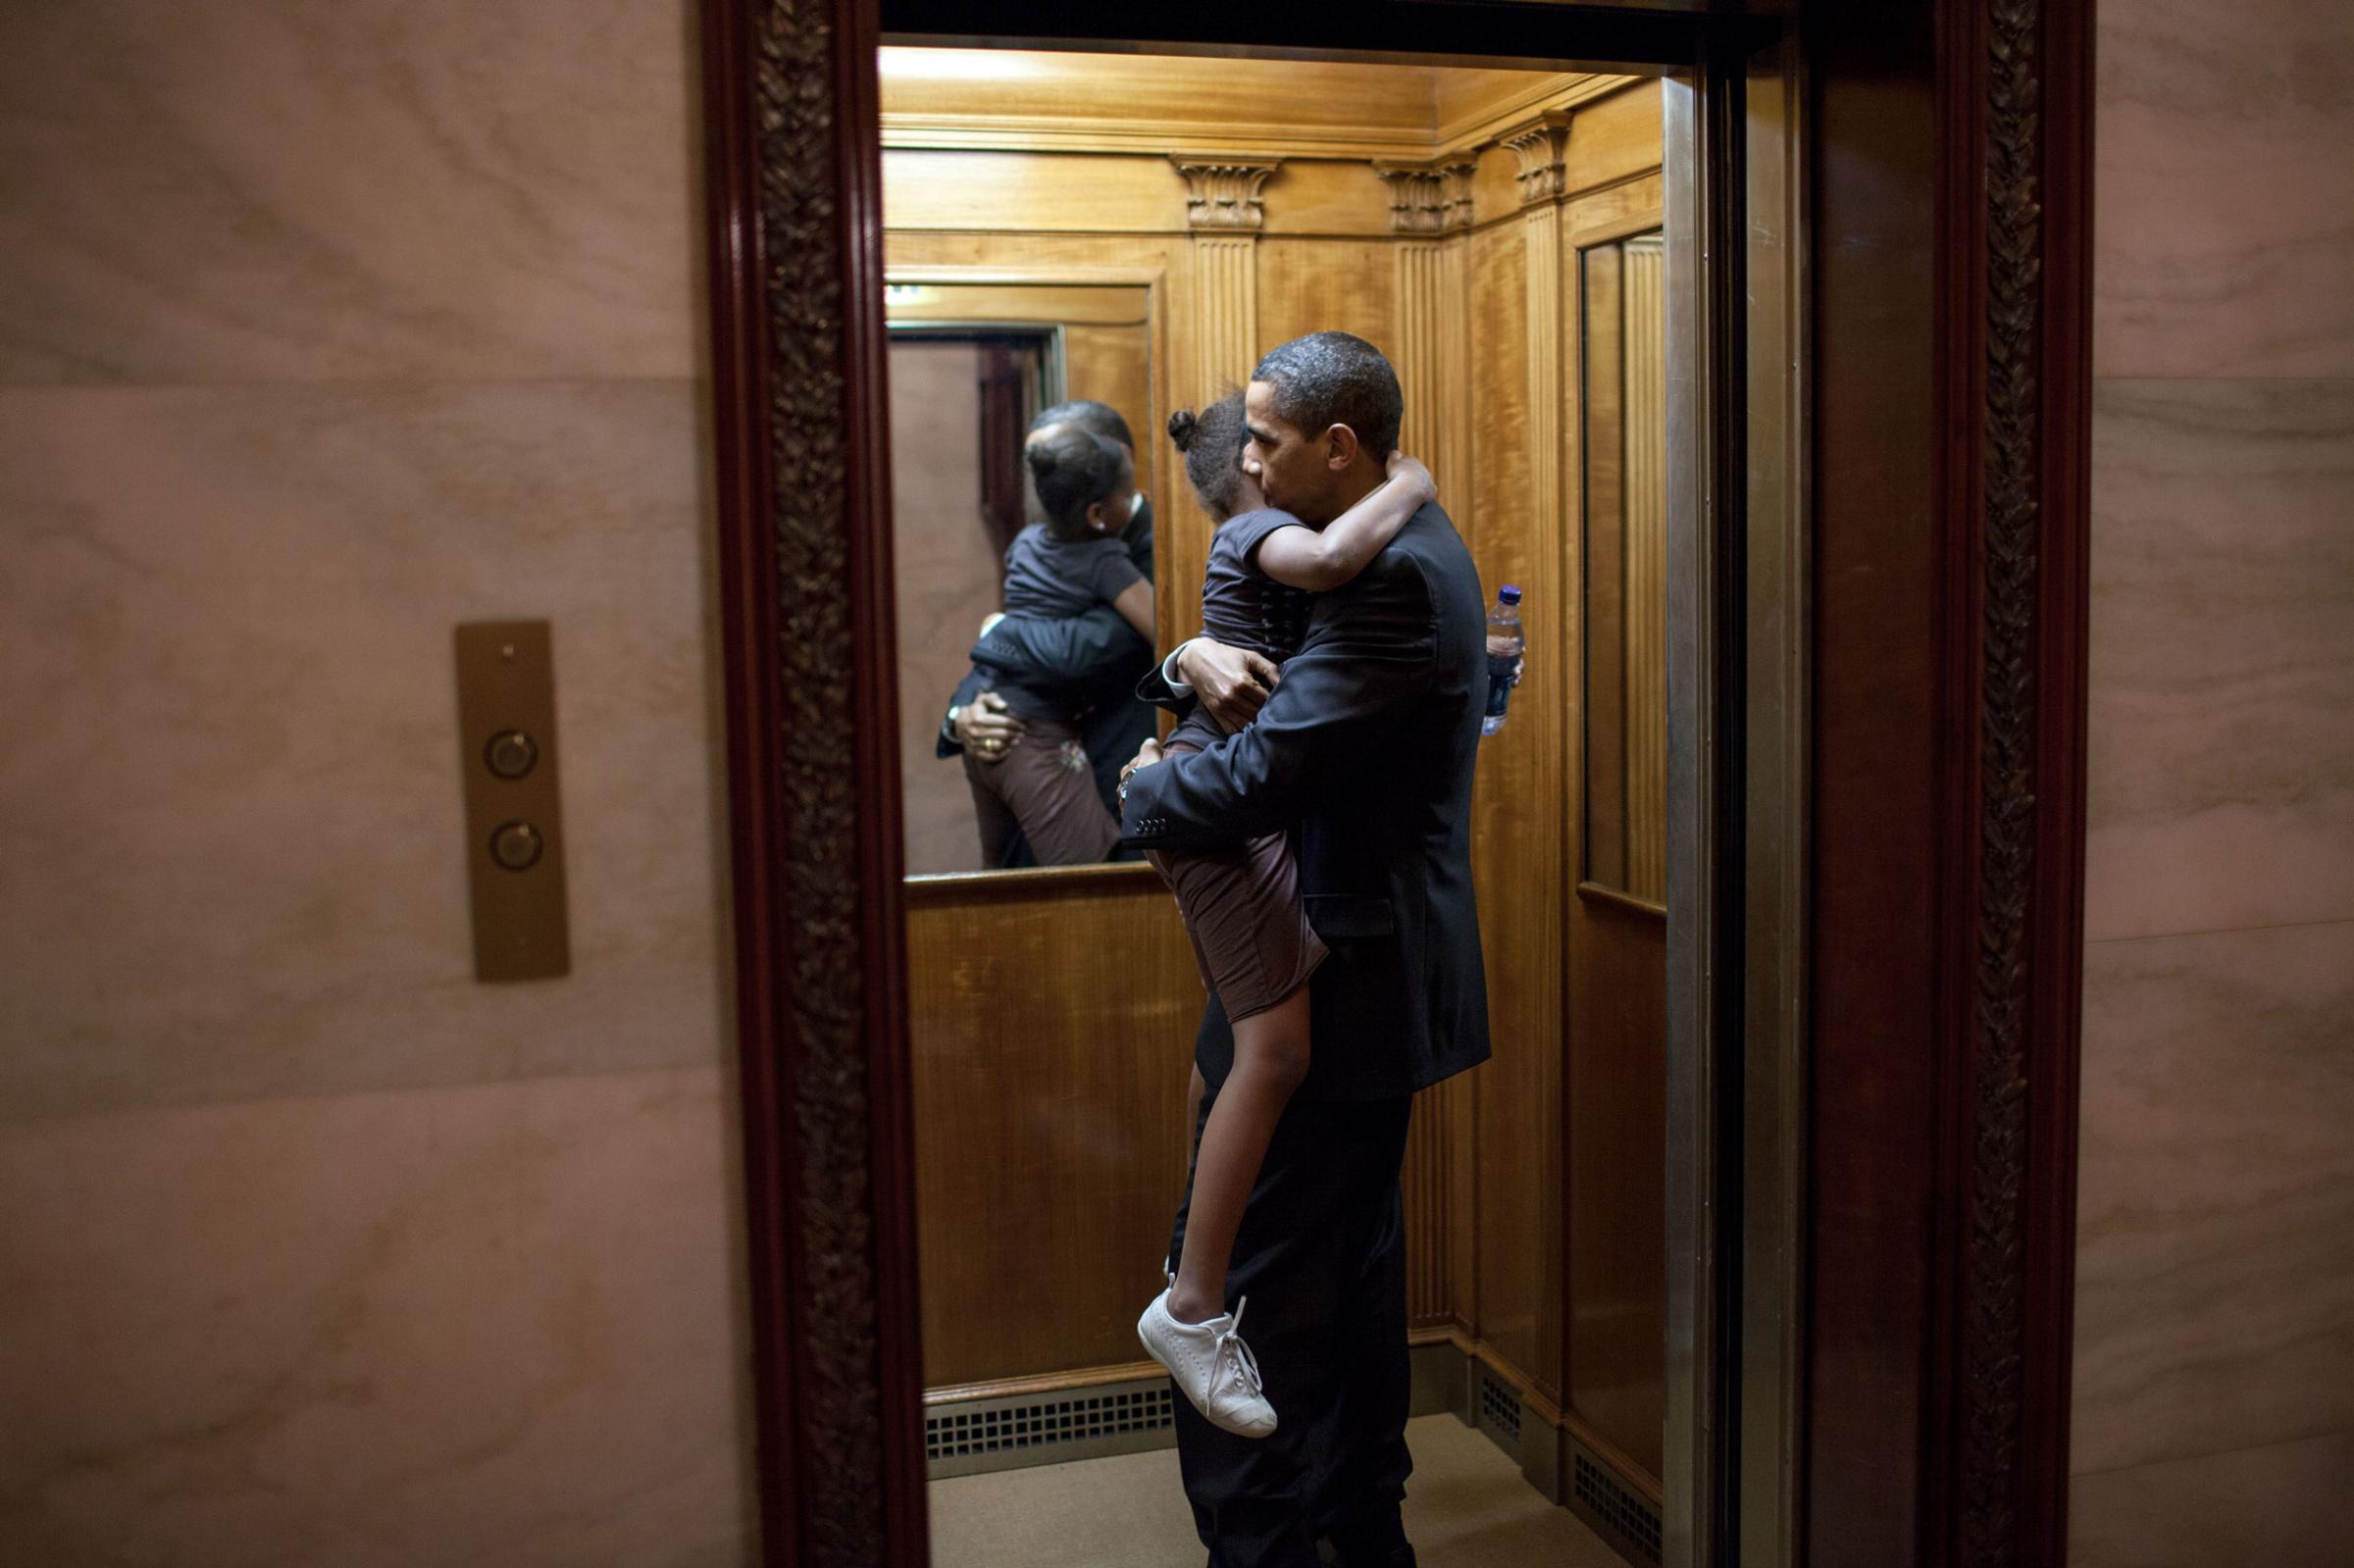 “The President was leaving the State Floor after an event and found Sasha in the elevator ready to head upstairs to the private residence. He decided to ride upstairs with her before returning to the Oval Office.” May 19, 2009